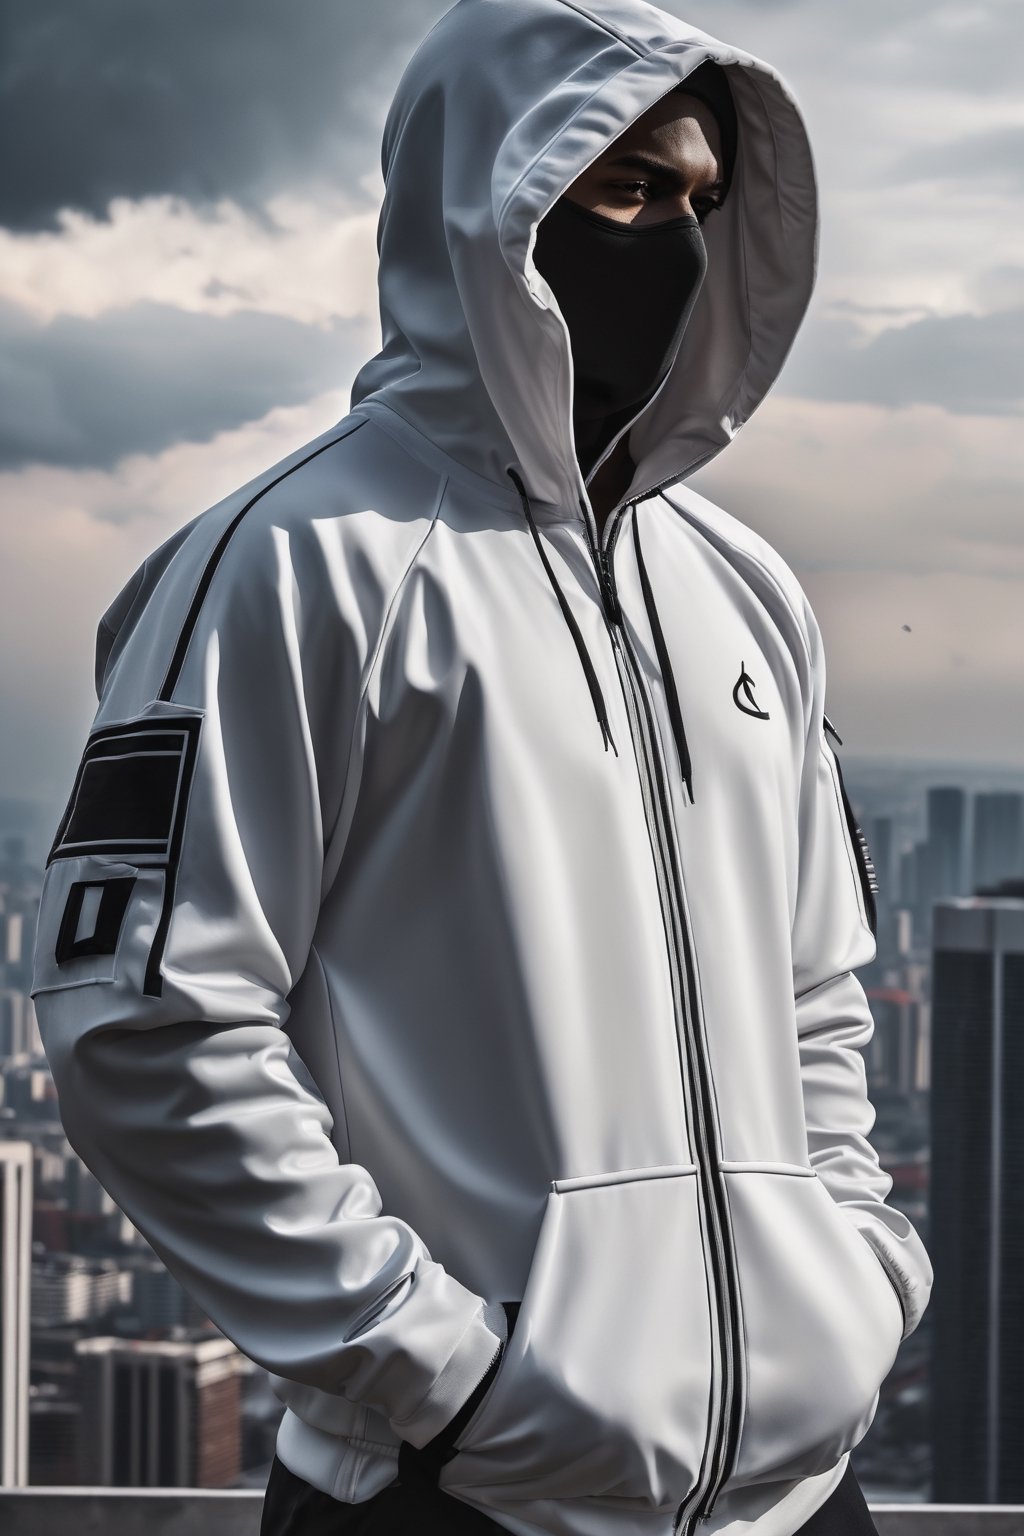 armed man, sports suit with hood, obscured face, stormy sky, city, photorealistic, thriller theme, smoke, high resolution photo, 4k, full detailed, Portrait, realistic, chloting white